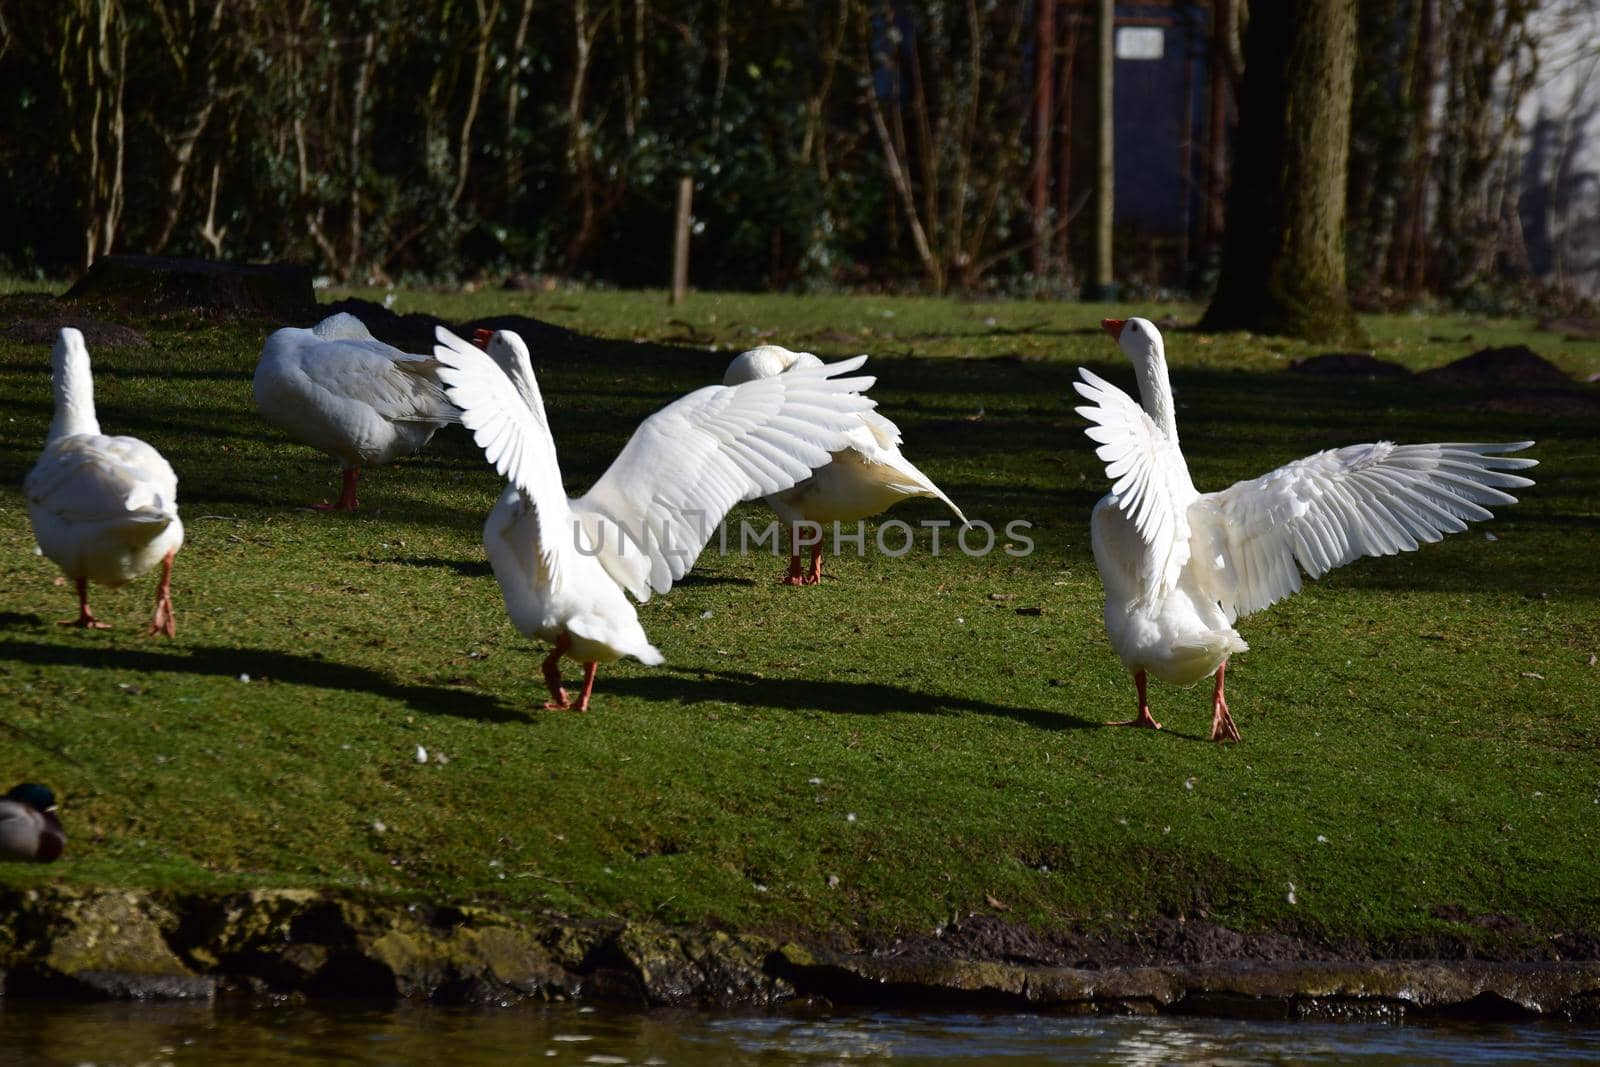 Two white geese are spreading her plumage